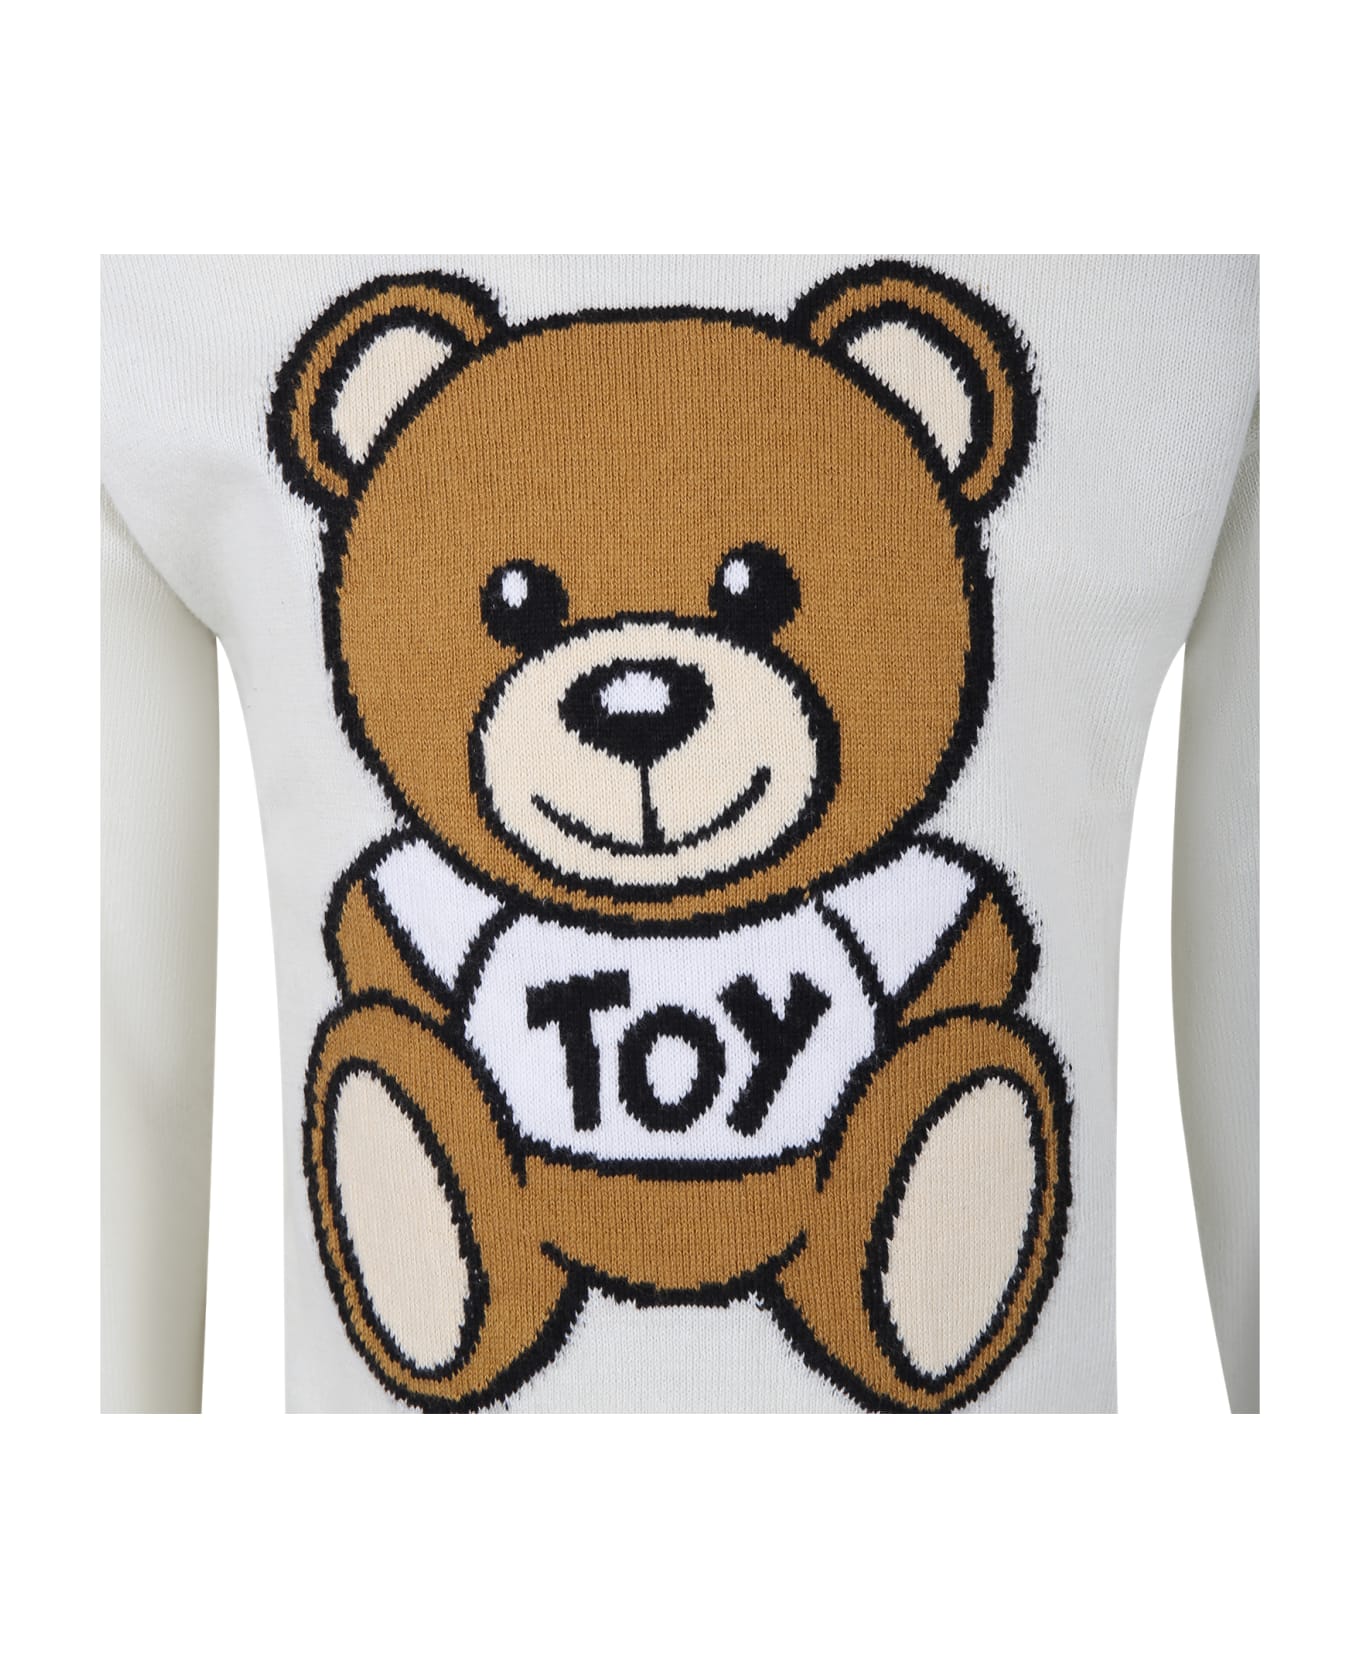 Moschino White Sweater For Kids With Teddy Bear - White